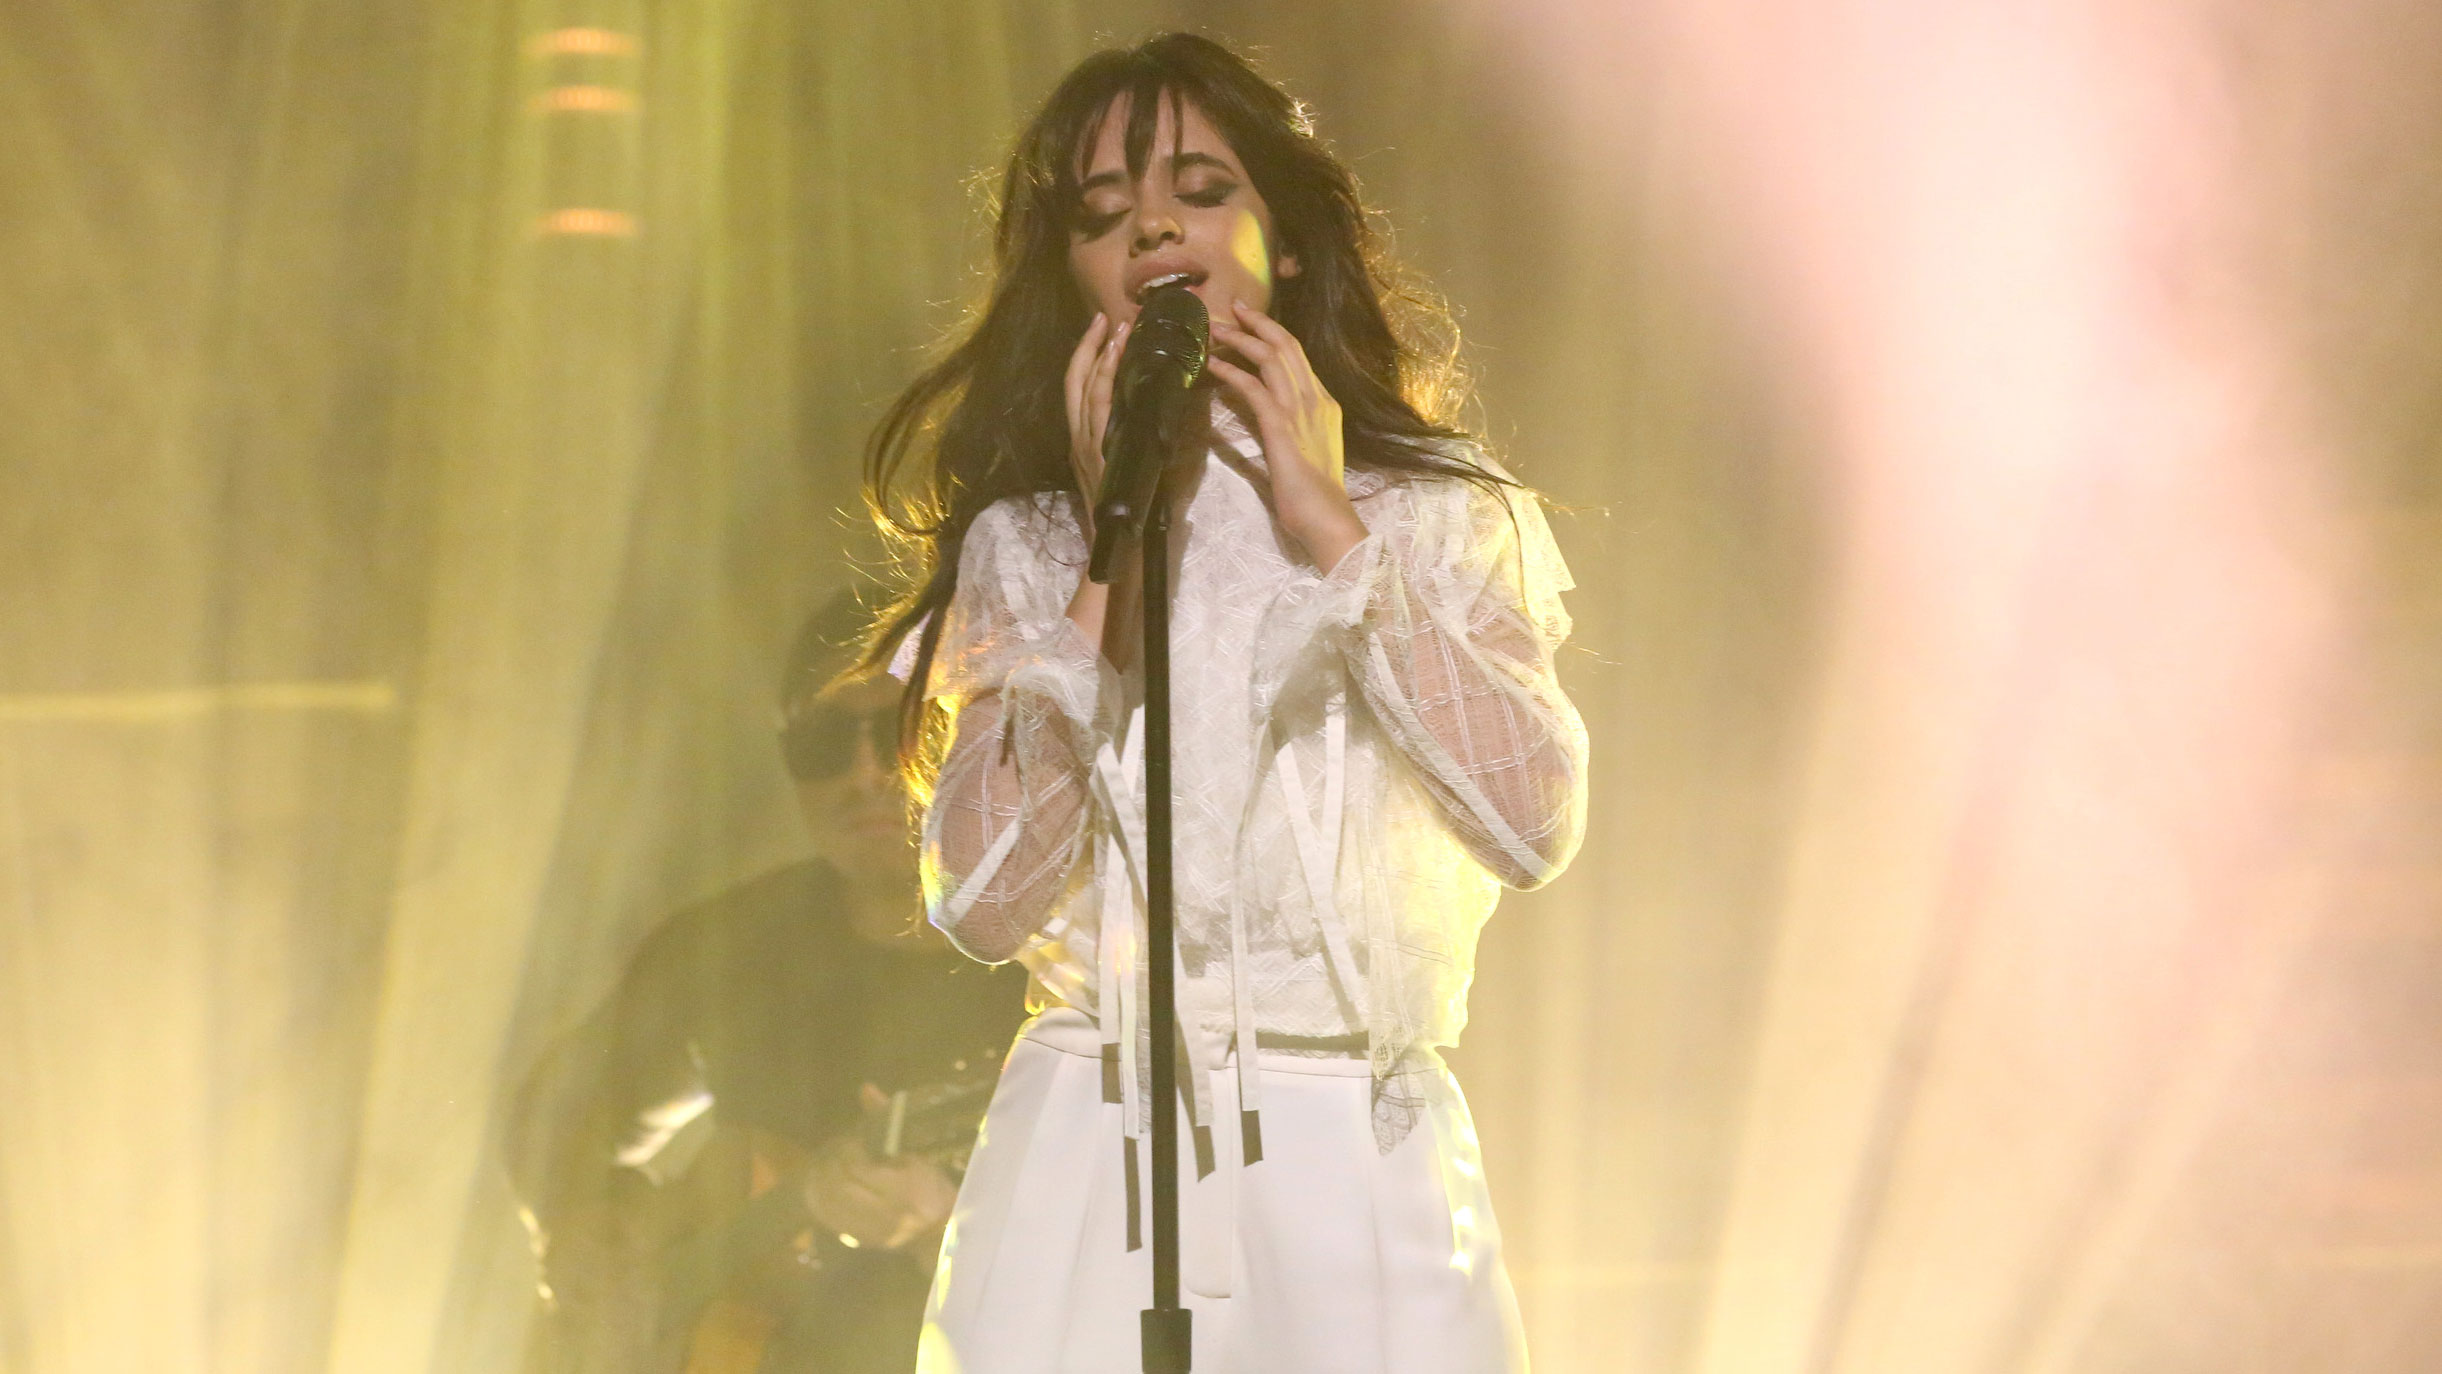 Watch The Tonight Show Starring Jimmy Fallon Highlight: Camila Cabello:  Crying in the Club 